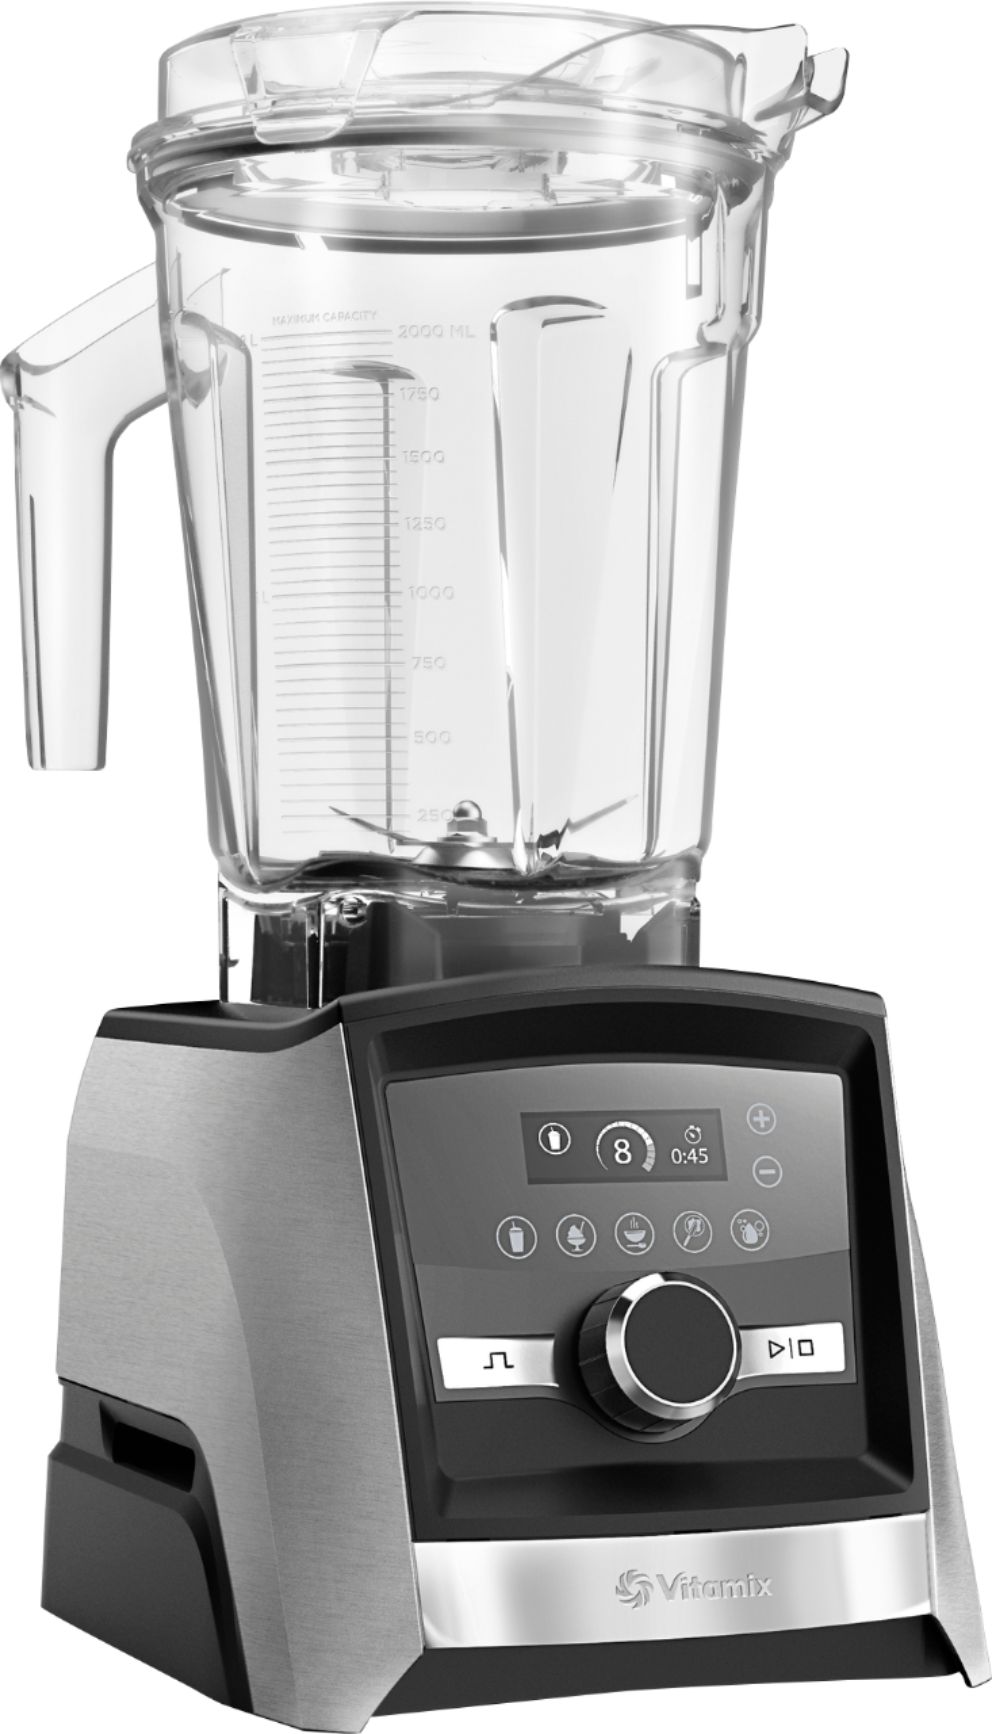 Angle View: Vitamix - Ascent Series A3500 Blender - Brushed Stainless Steel